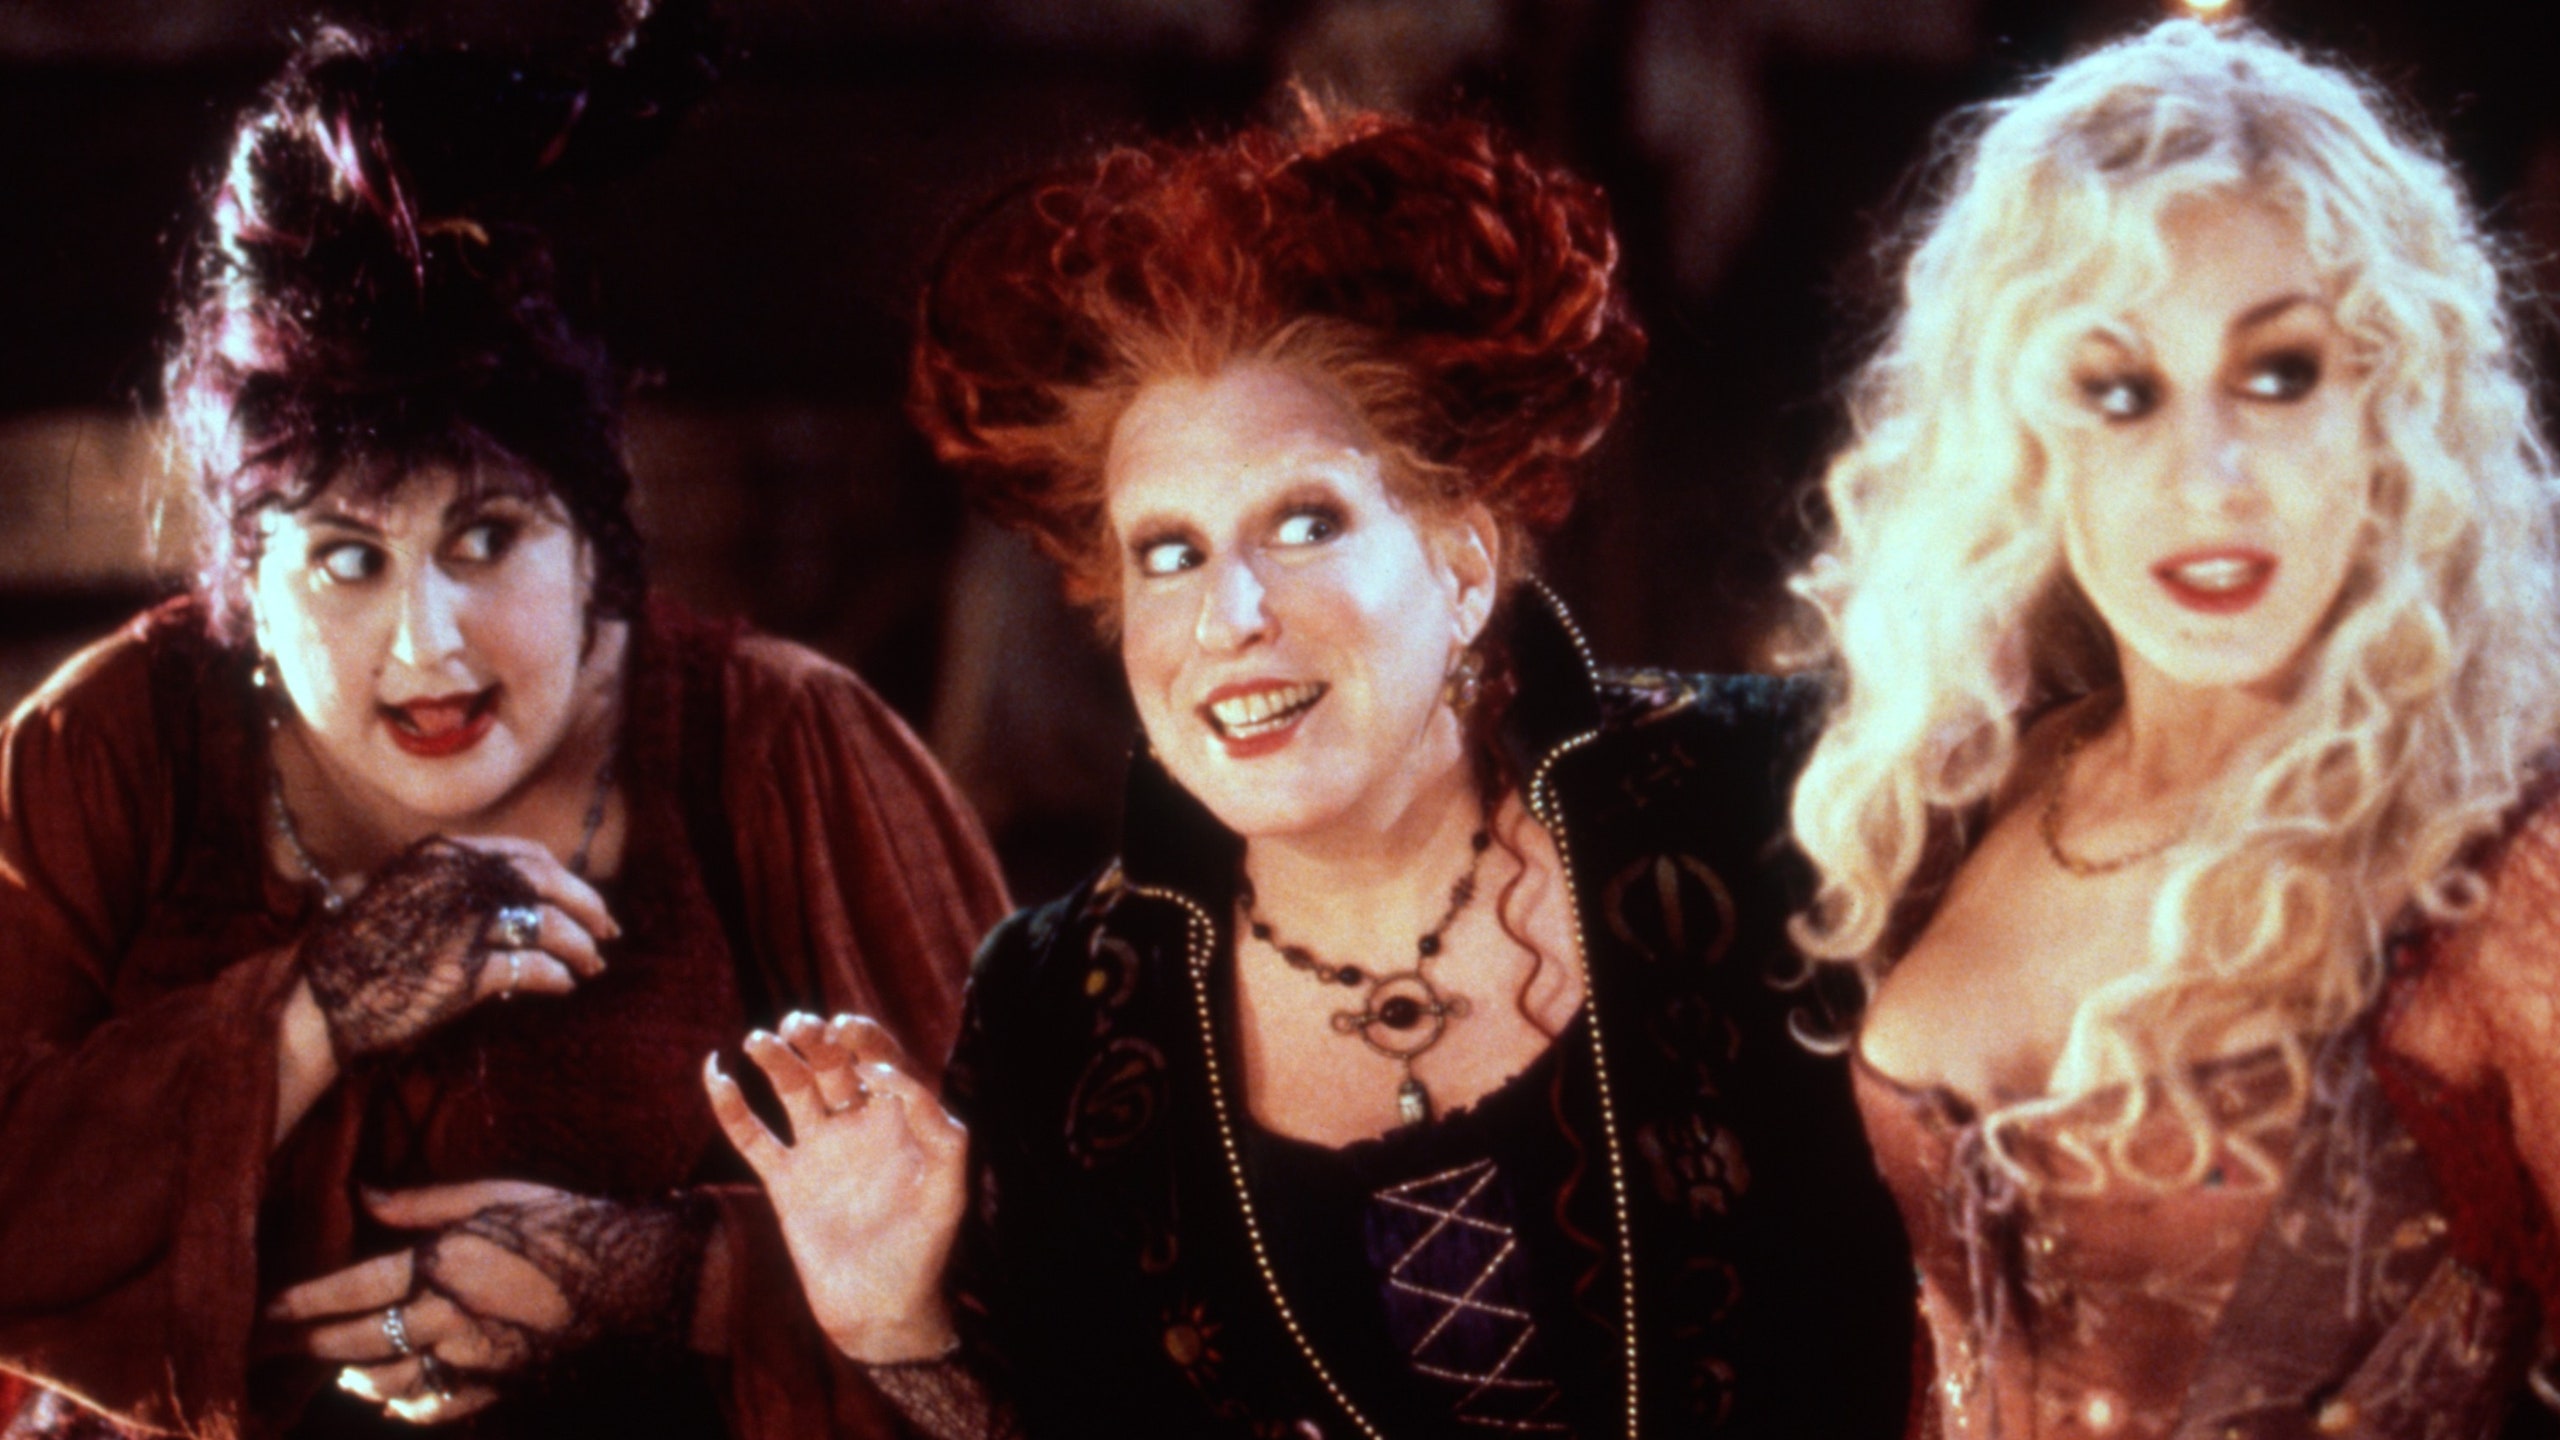 Hocus Pocus” Crocs Are a Thing Now